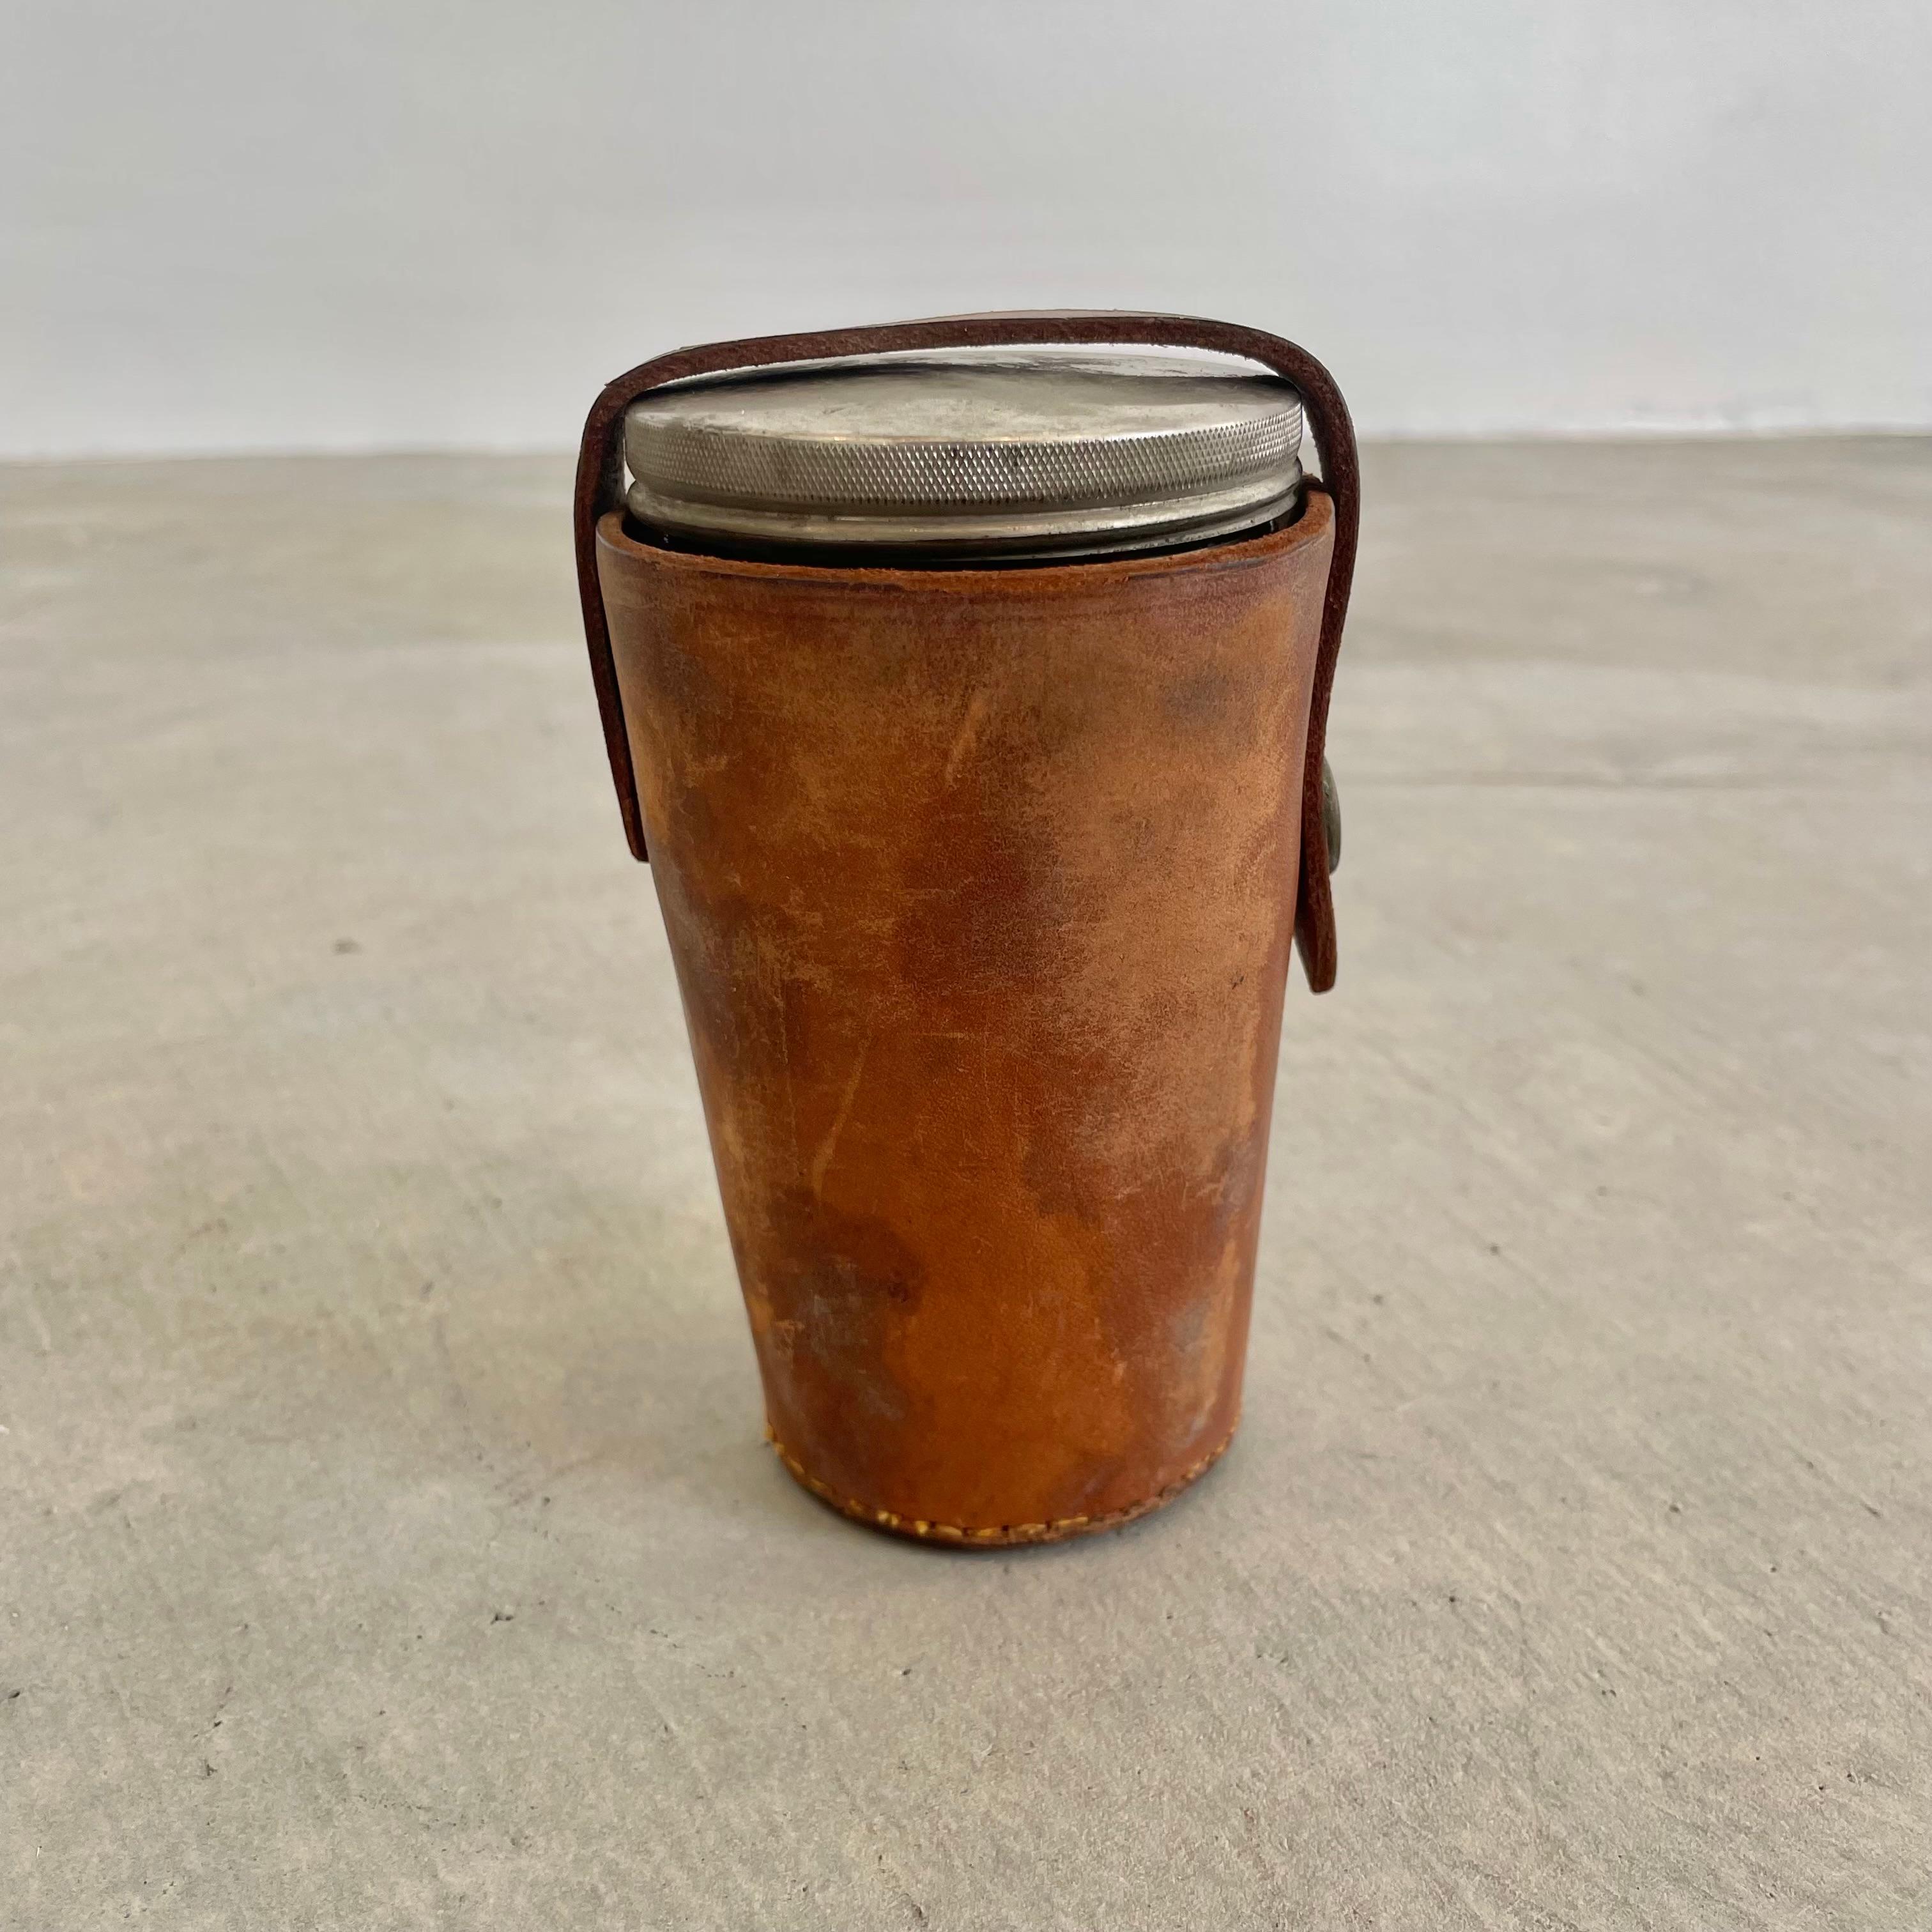 Set of 4 metal Thermos cups from the early 1900s in great condition with a thick cowhide cover and a lid. Incredible condition to metal cups for being over 100 years old. Leather cup holder assumed to have been remade in the 60s. Great for camping